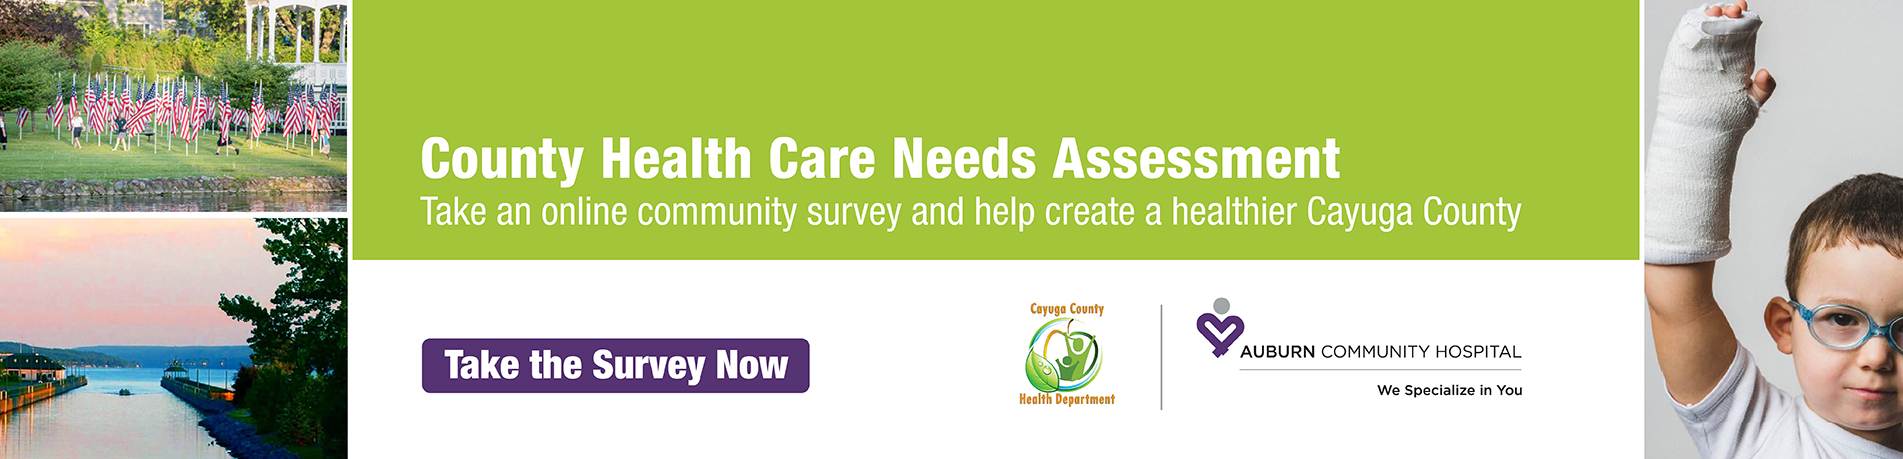 COUNTY HEALTH CARE NEEDS ASSESSMENT